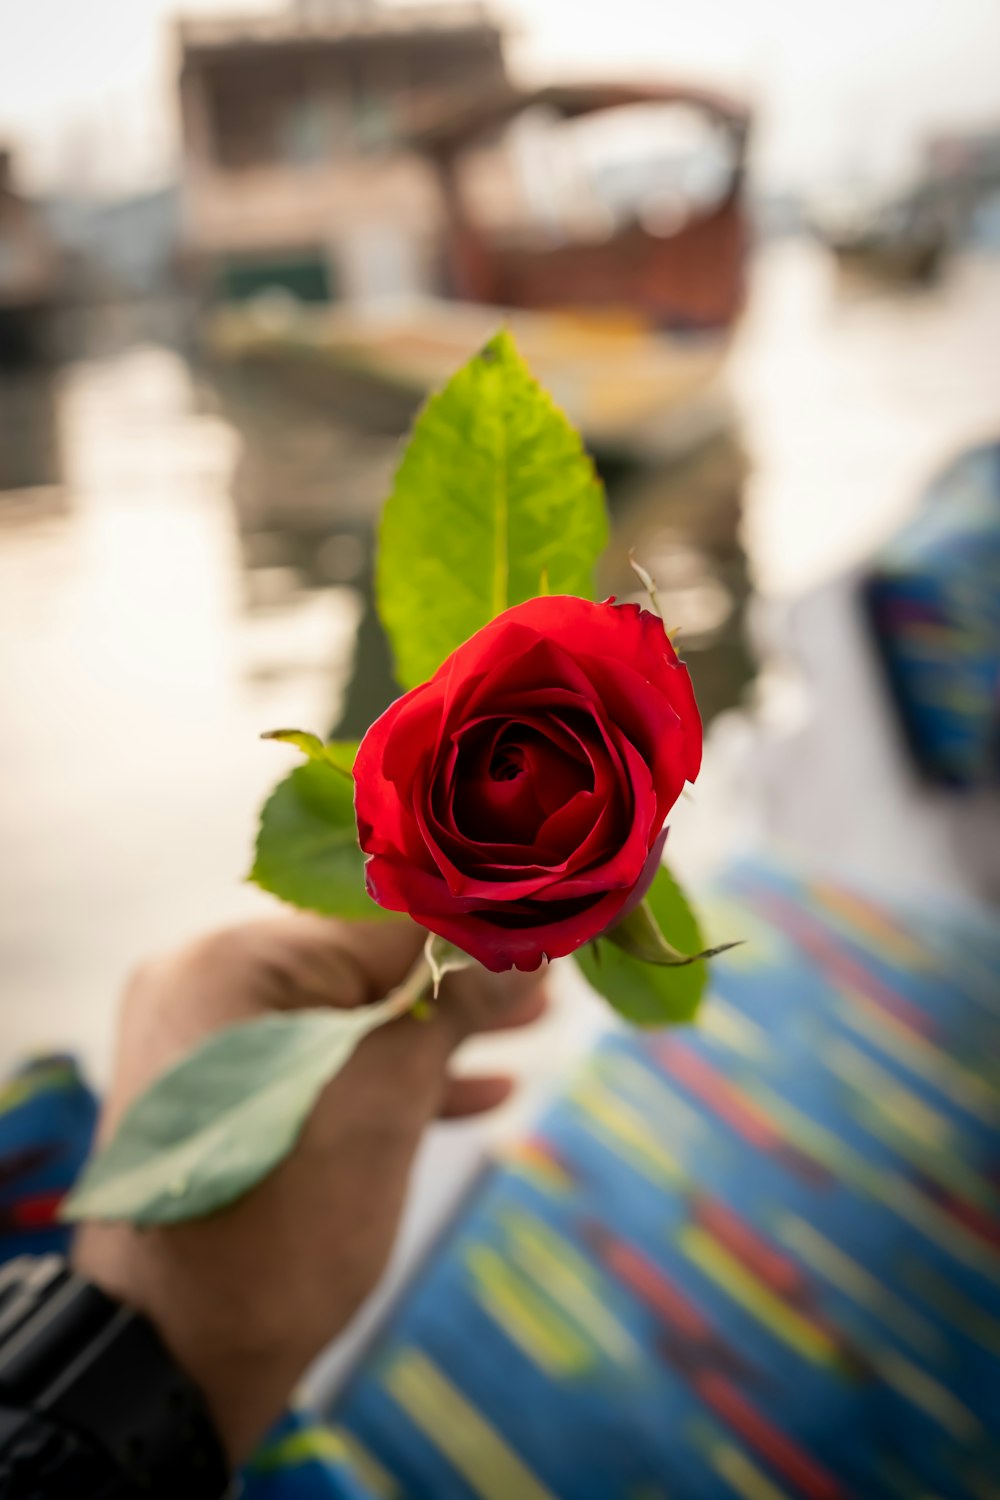 a person holding a red rose in their hand